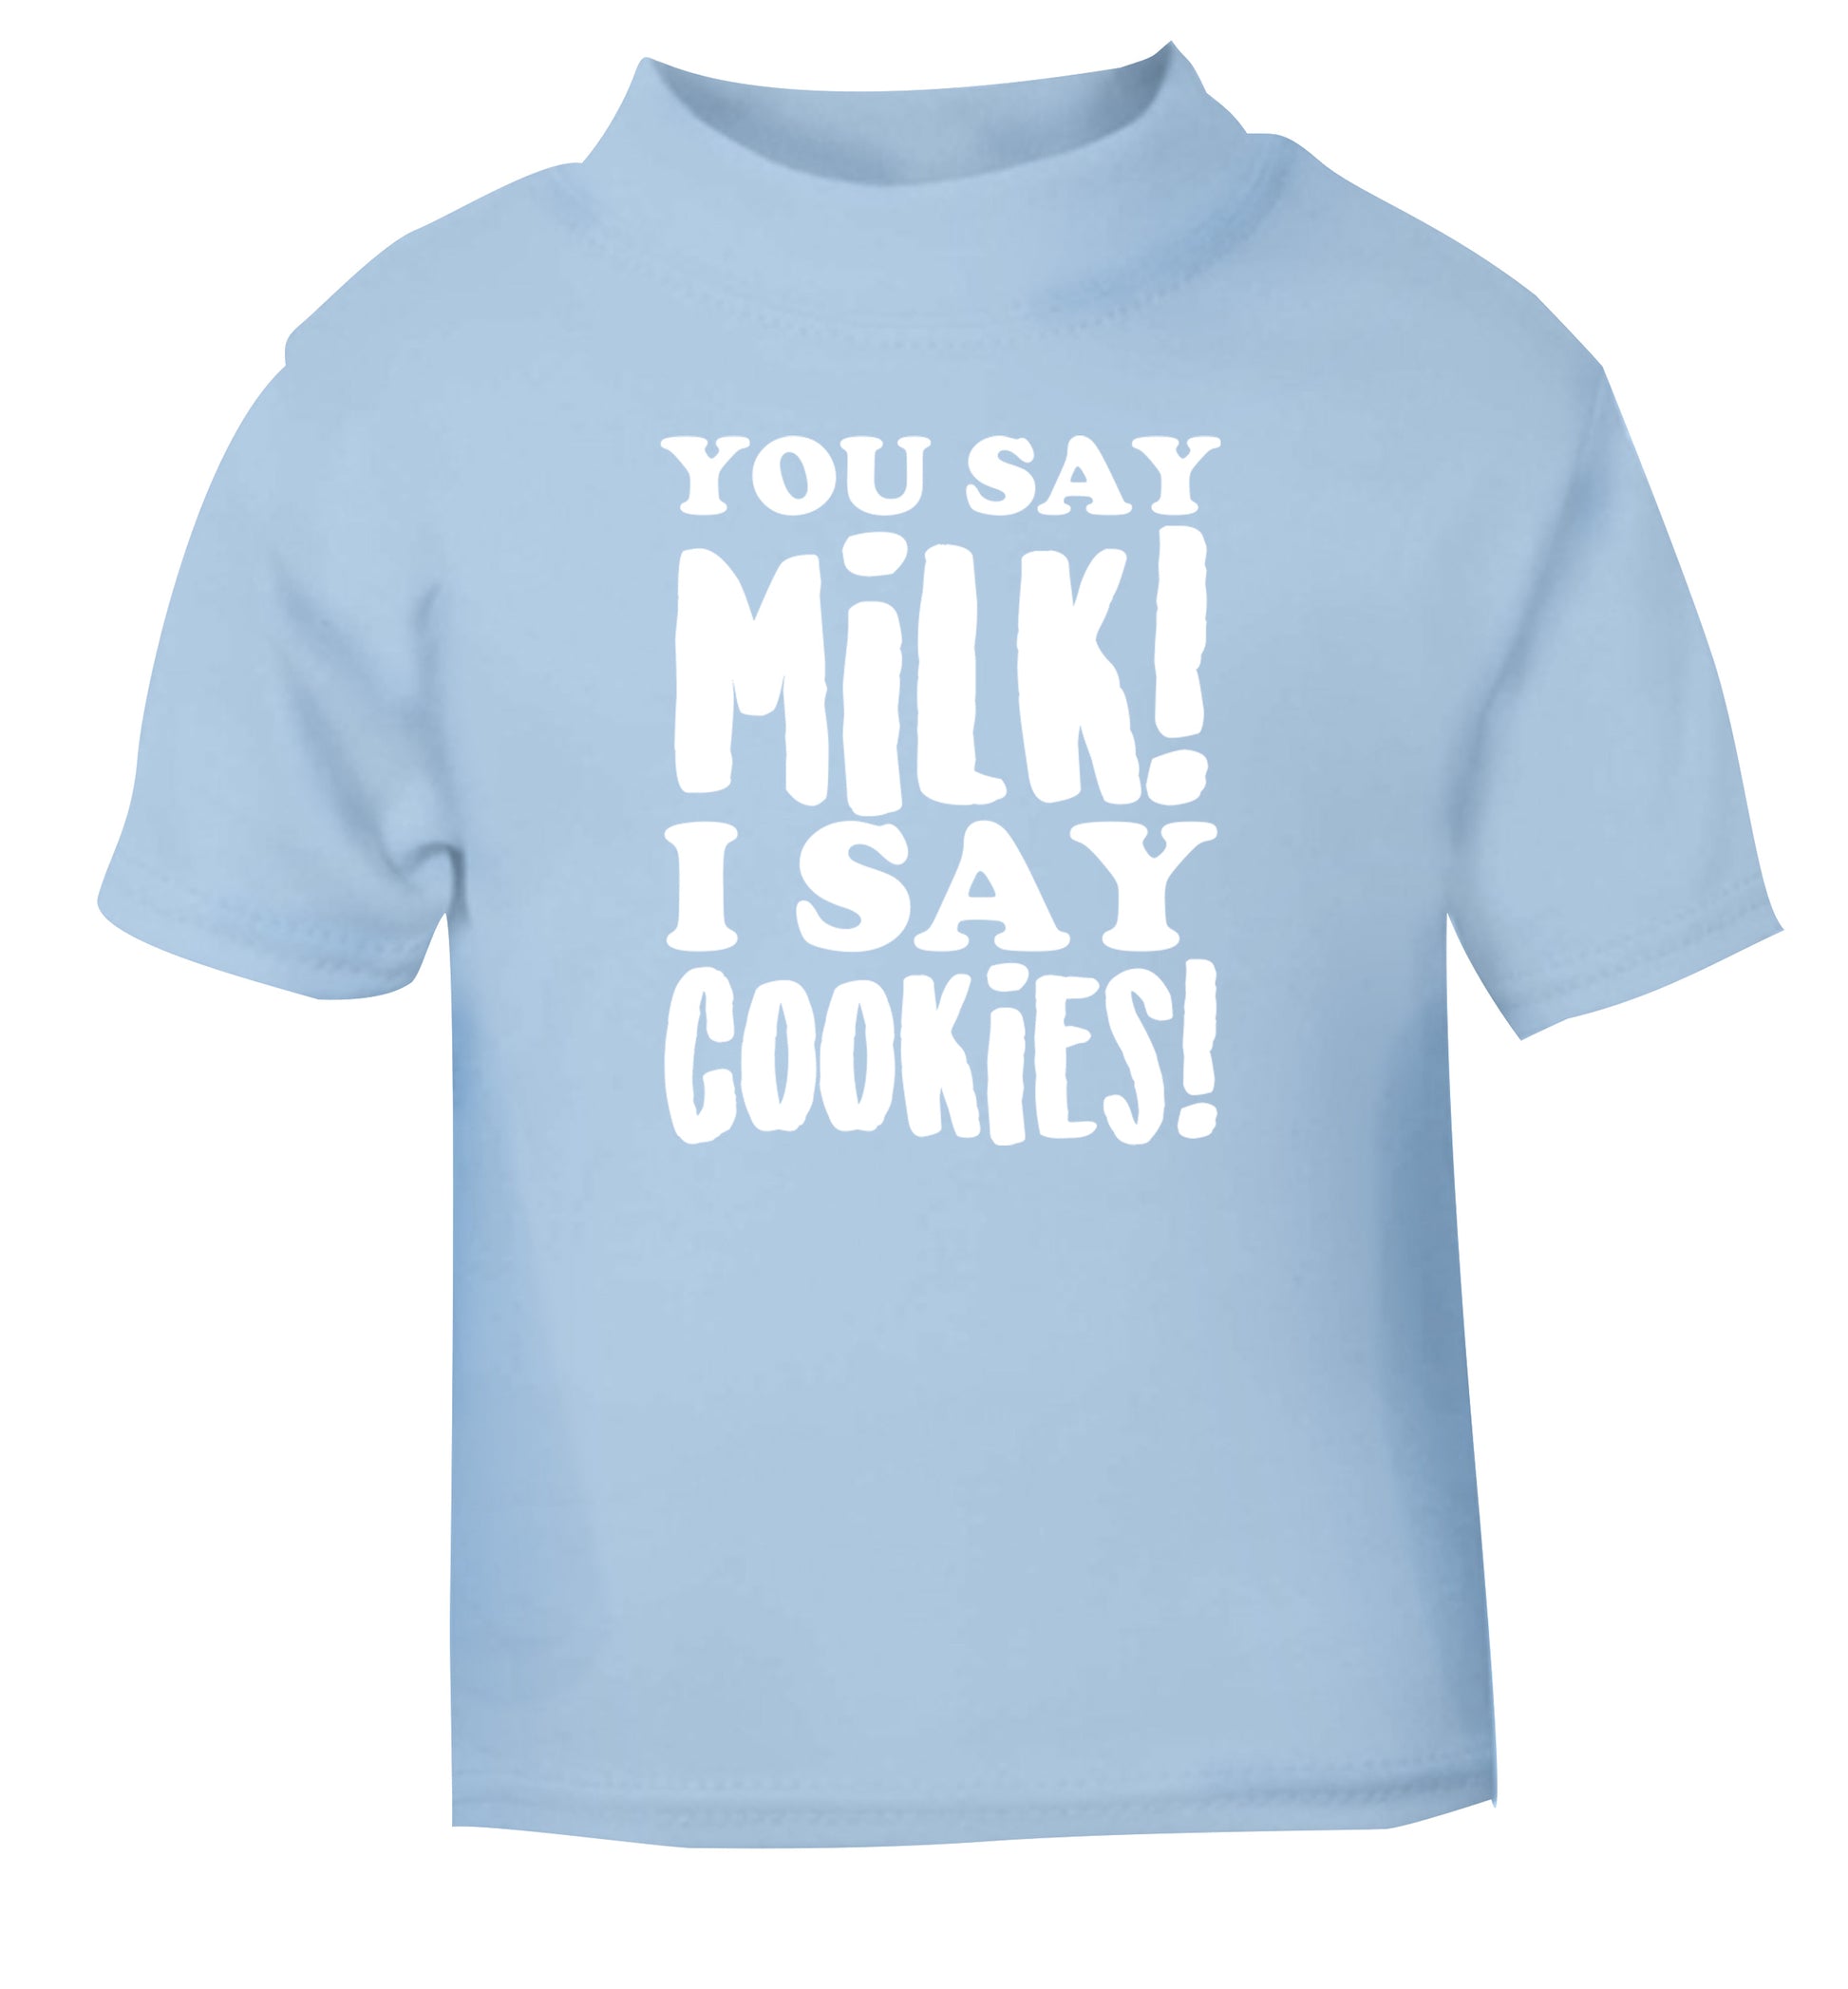 You say milk I say cookies! light blue Baby Toddler Tshirt 2 Years